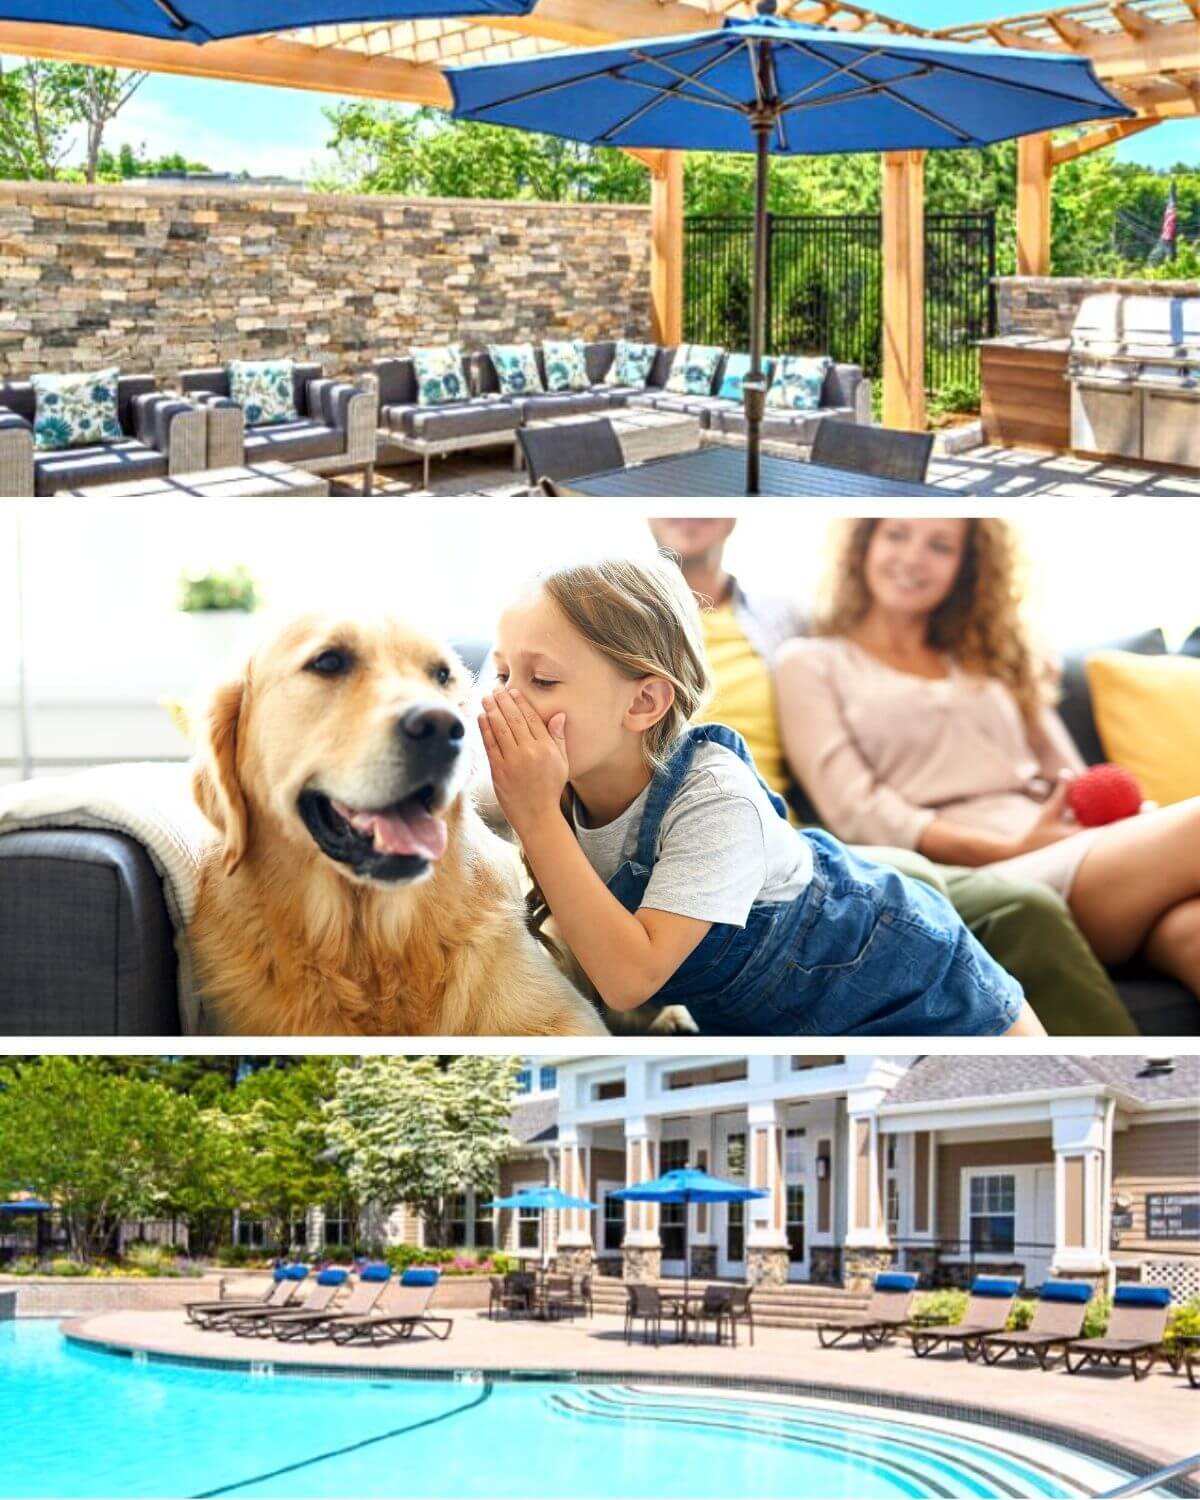 Outdoor seating area under umbrellas, swimming pool, and family with their golden retriever dog